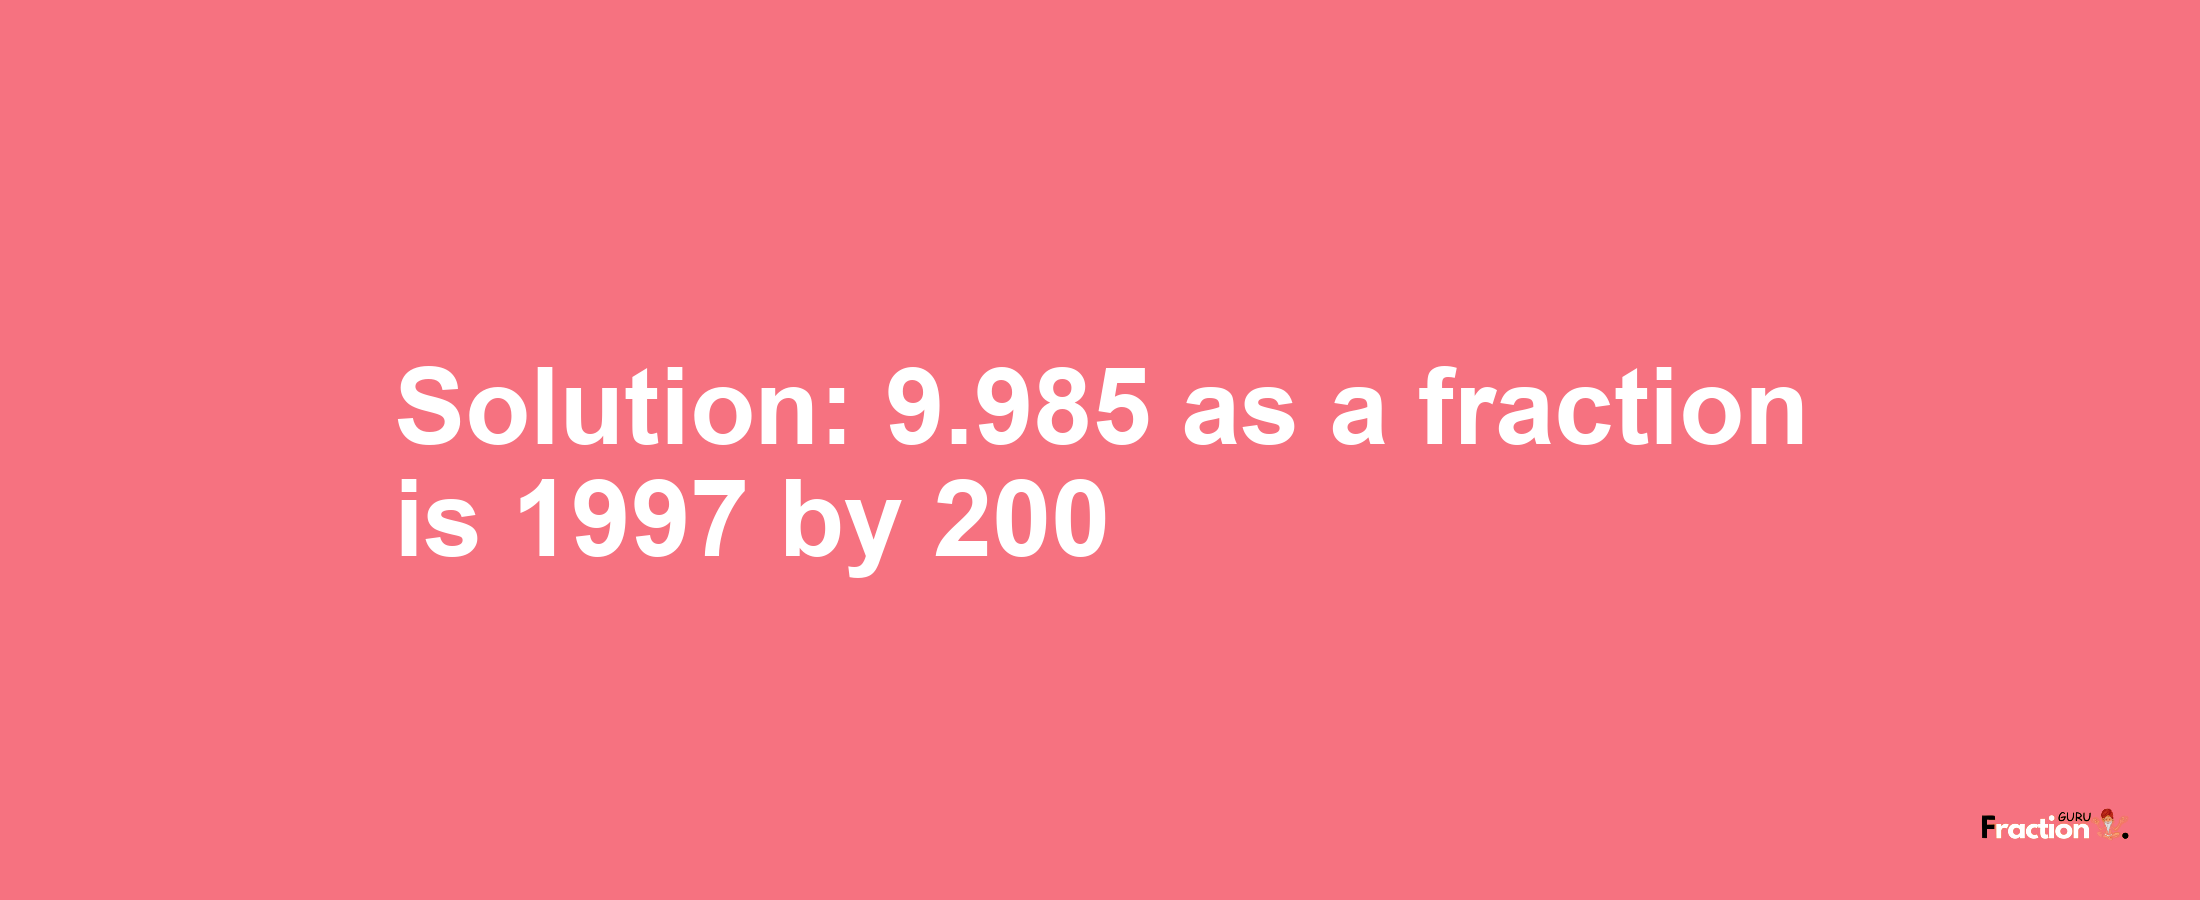 Solution:9.985 as a fraction is 1997/200